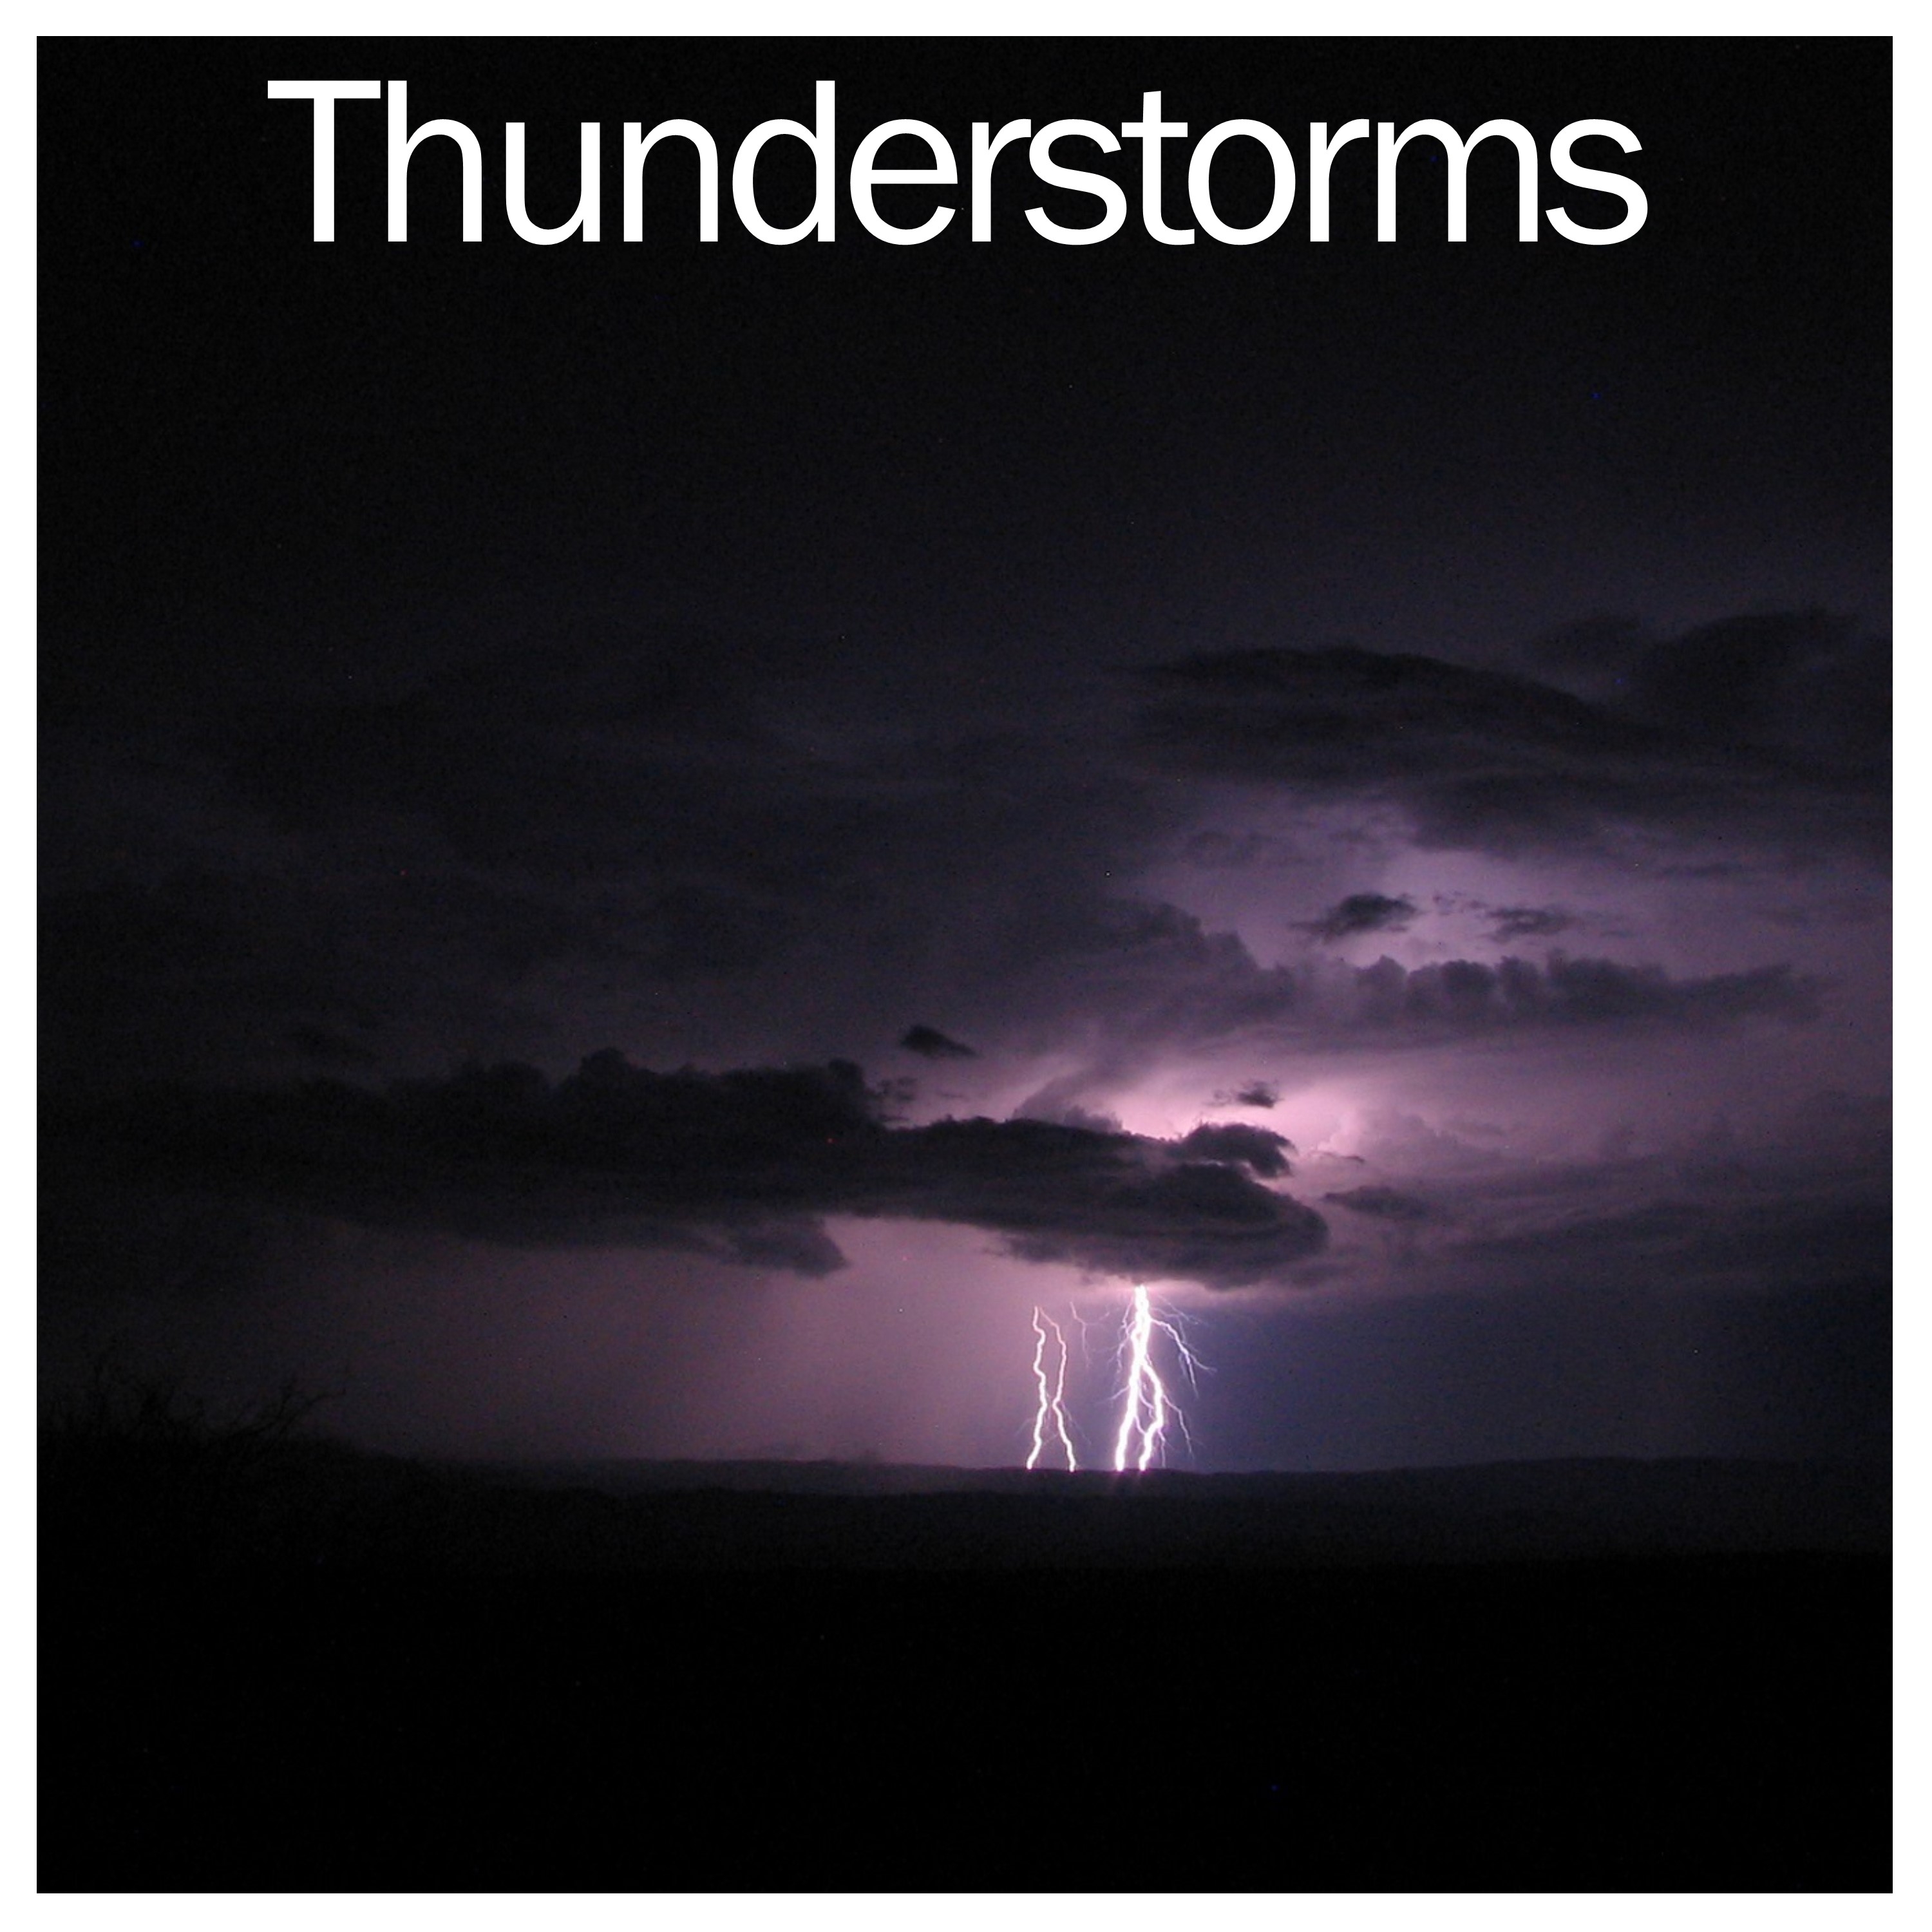 19 Sounds of Nature - White Noise and Thunderstorms for Spa and Sleep